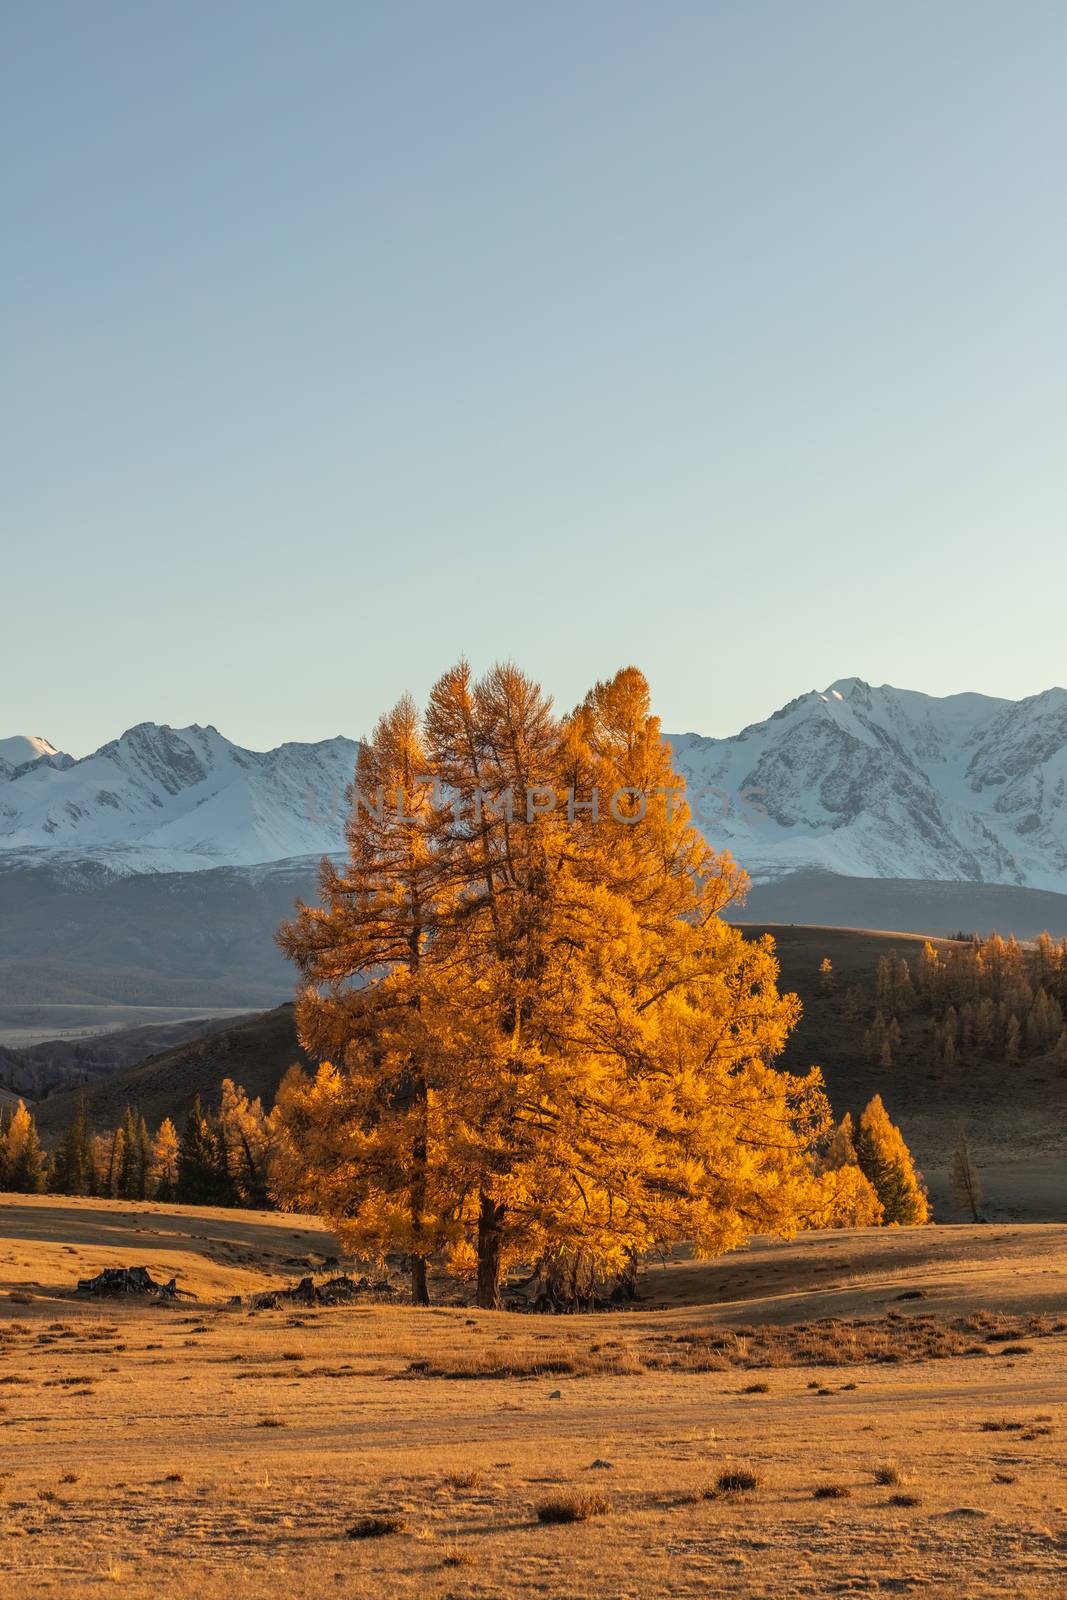 Beautiful portrait size shot of a golden tree in the foreground and white snowy mountains in the background. Fall time. Sunset. Altai mountains, Russia. Golden hour by DamantisZ